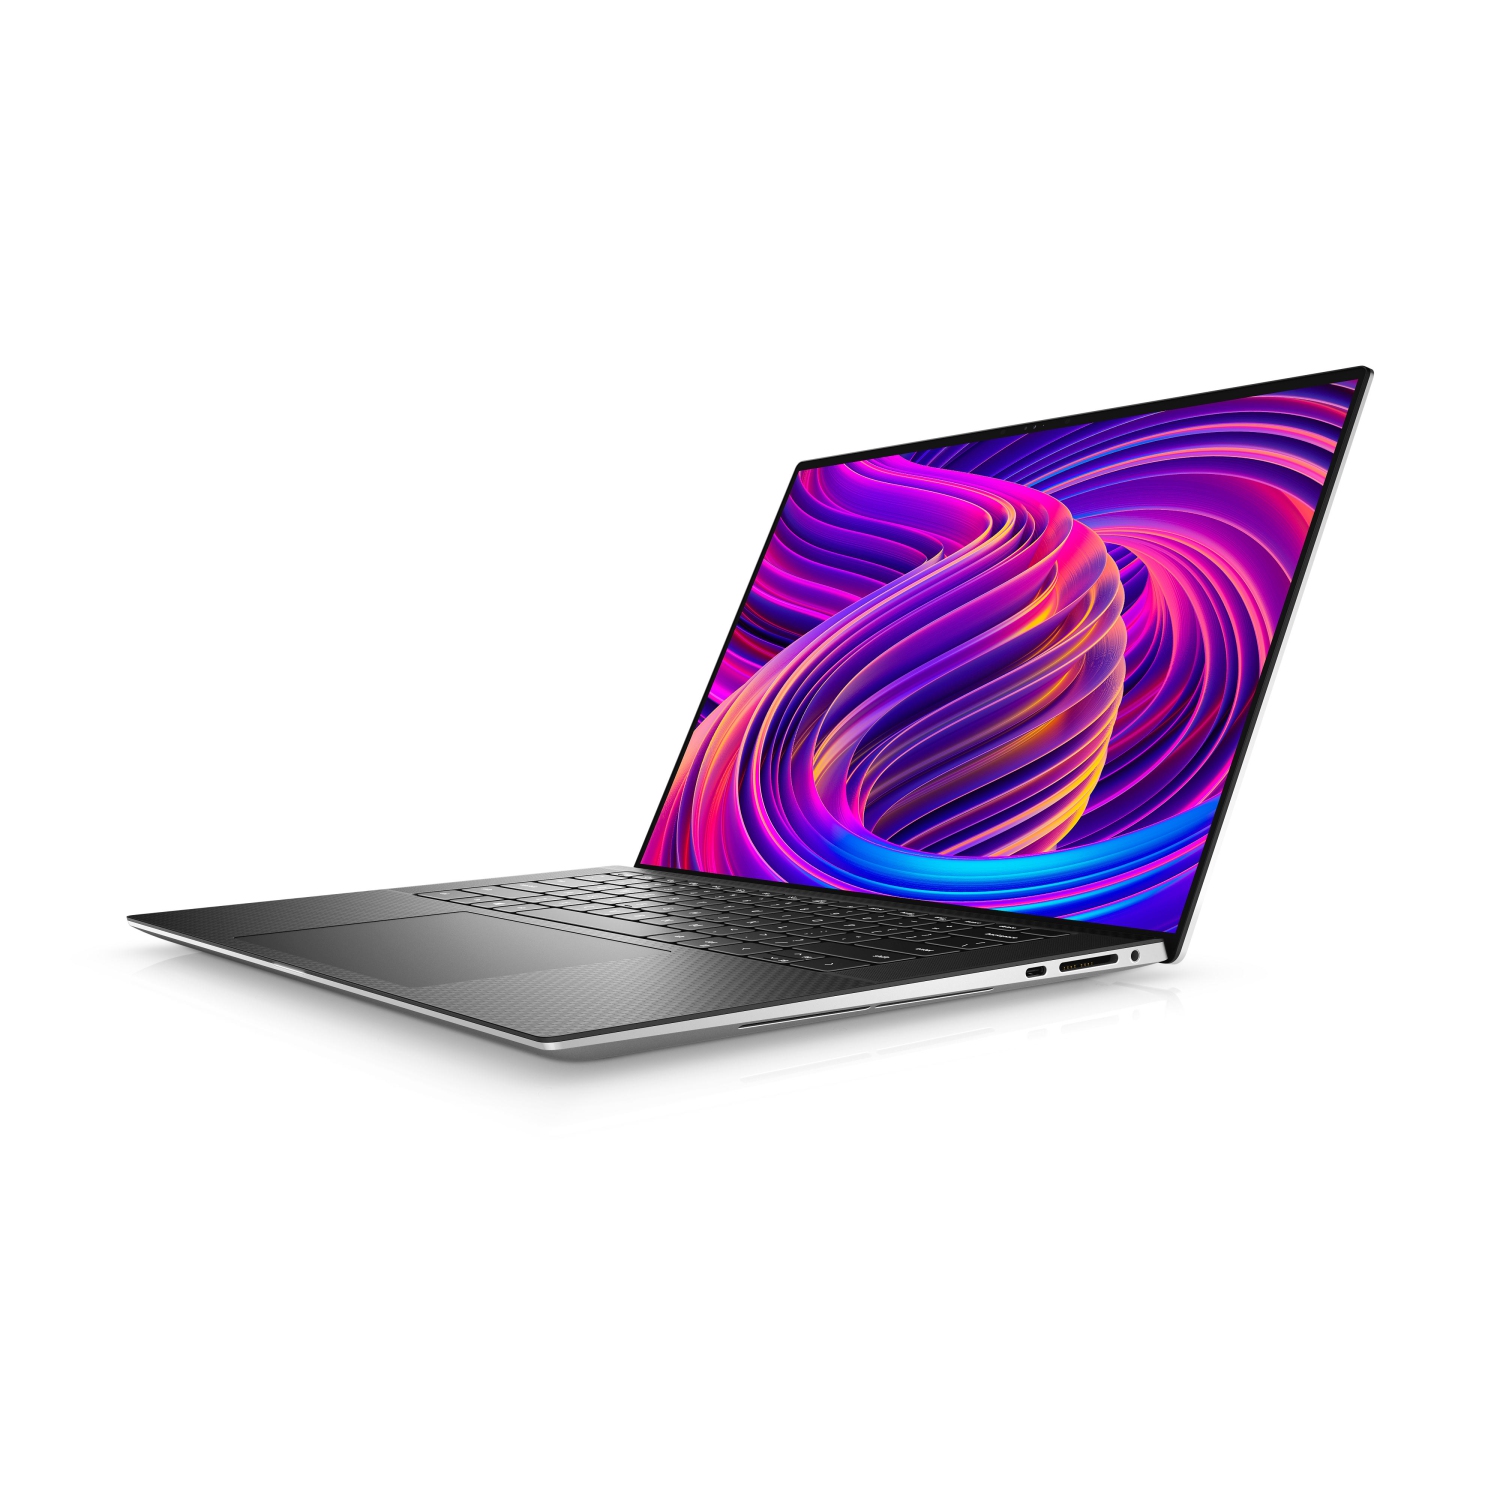 Refurbished (Excellent) - Dell XPS 15 9510 Laptop (2021) | 15.6" FHD+ | Core i7 - 512GB SSD - 32GB RAM - 3050 Ti | 8 Cores @ 4.6 GHz - 11th Gen CPU Certified Refurbished